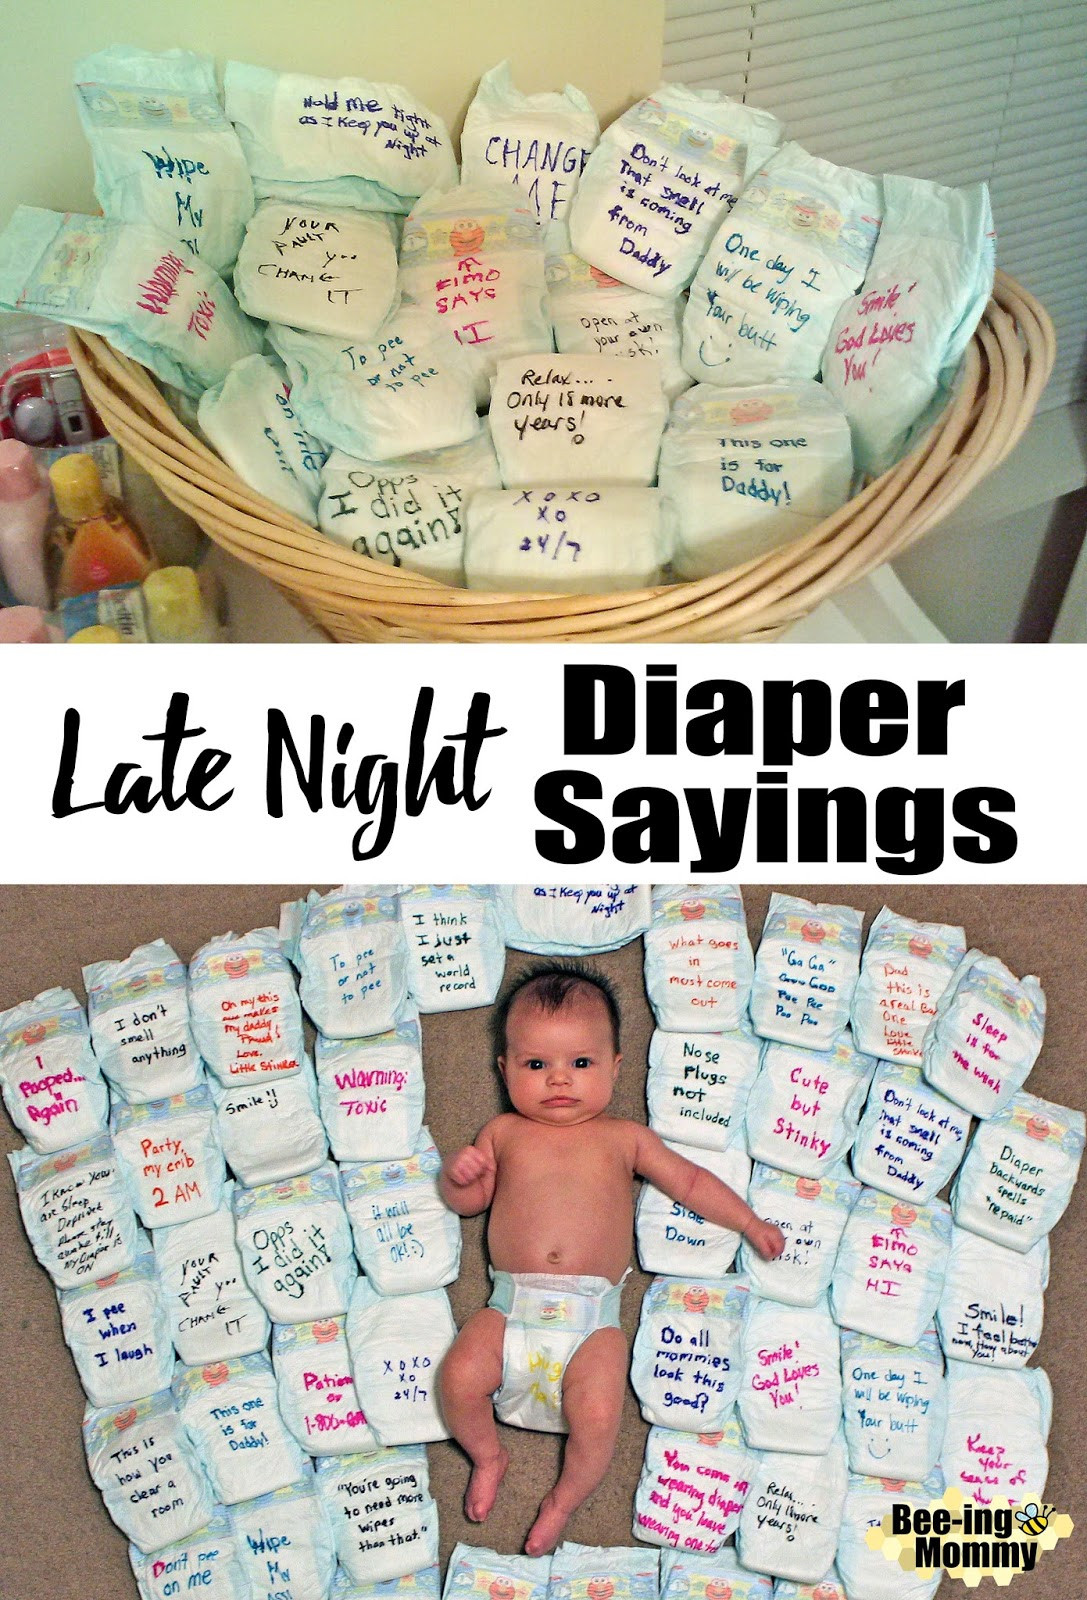 Funny Diaper Quotes For Baby Shower
 Late Night Diaper Sayings for your next Baby Shower